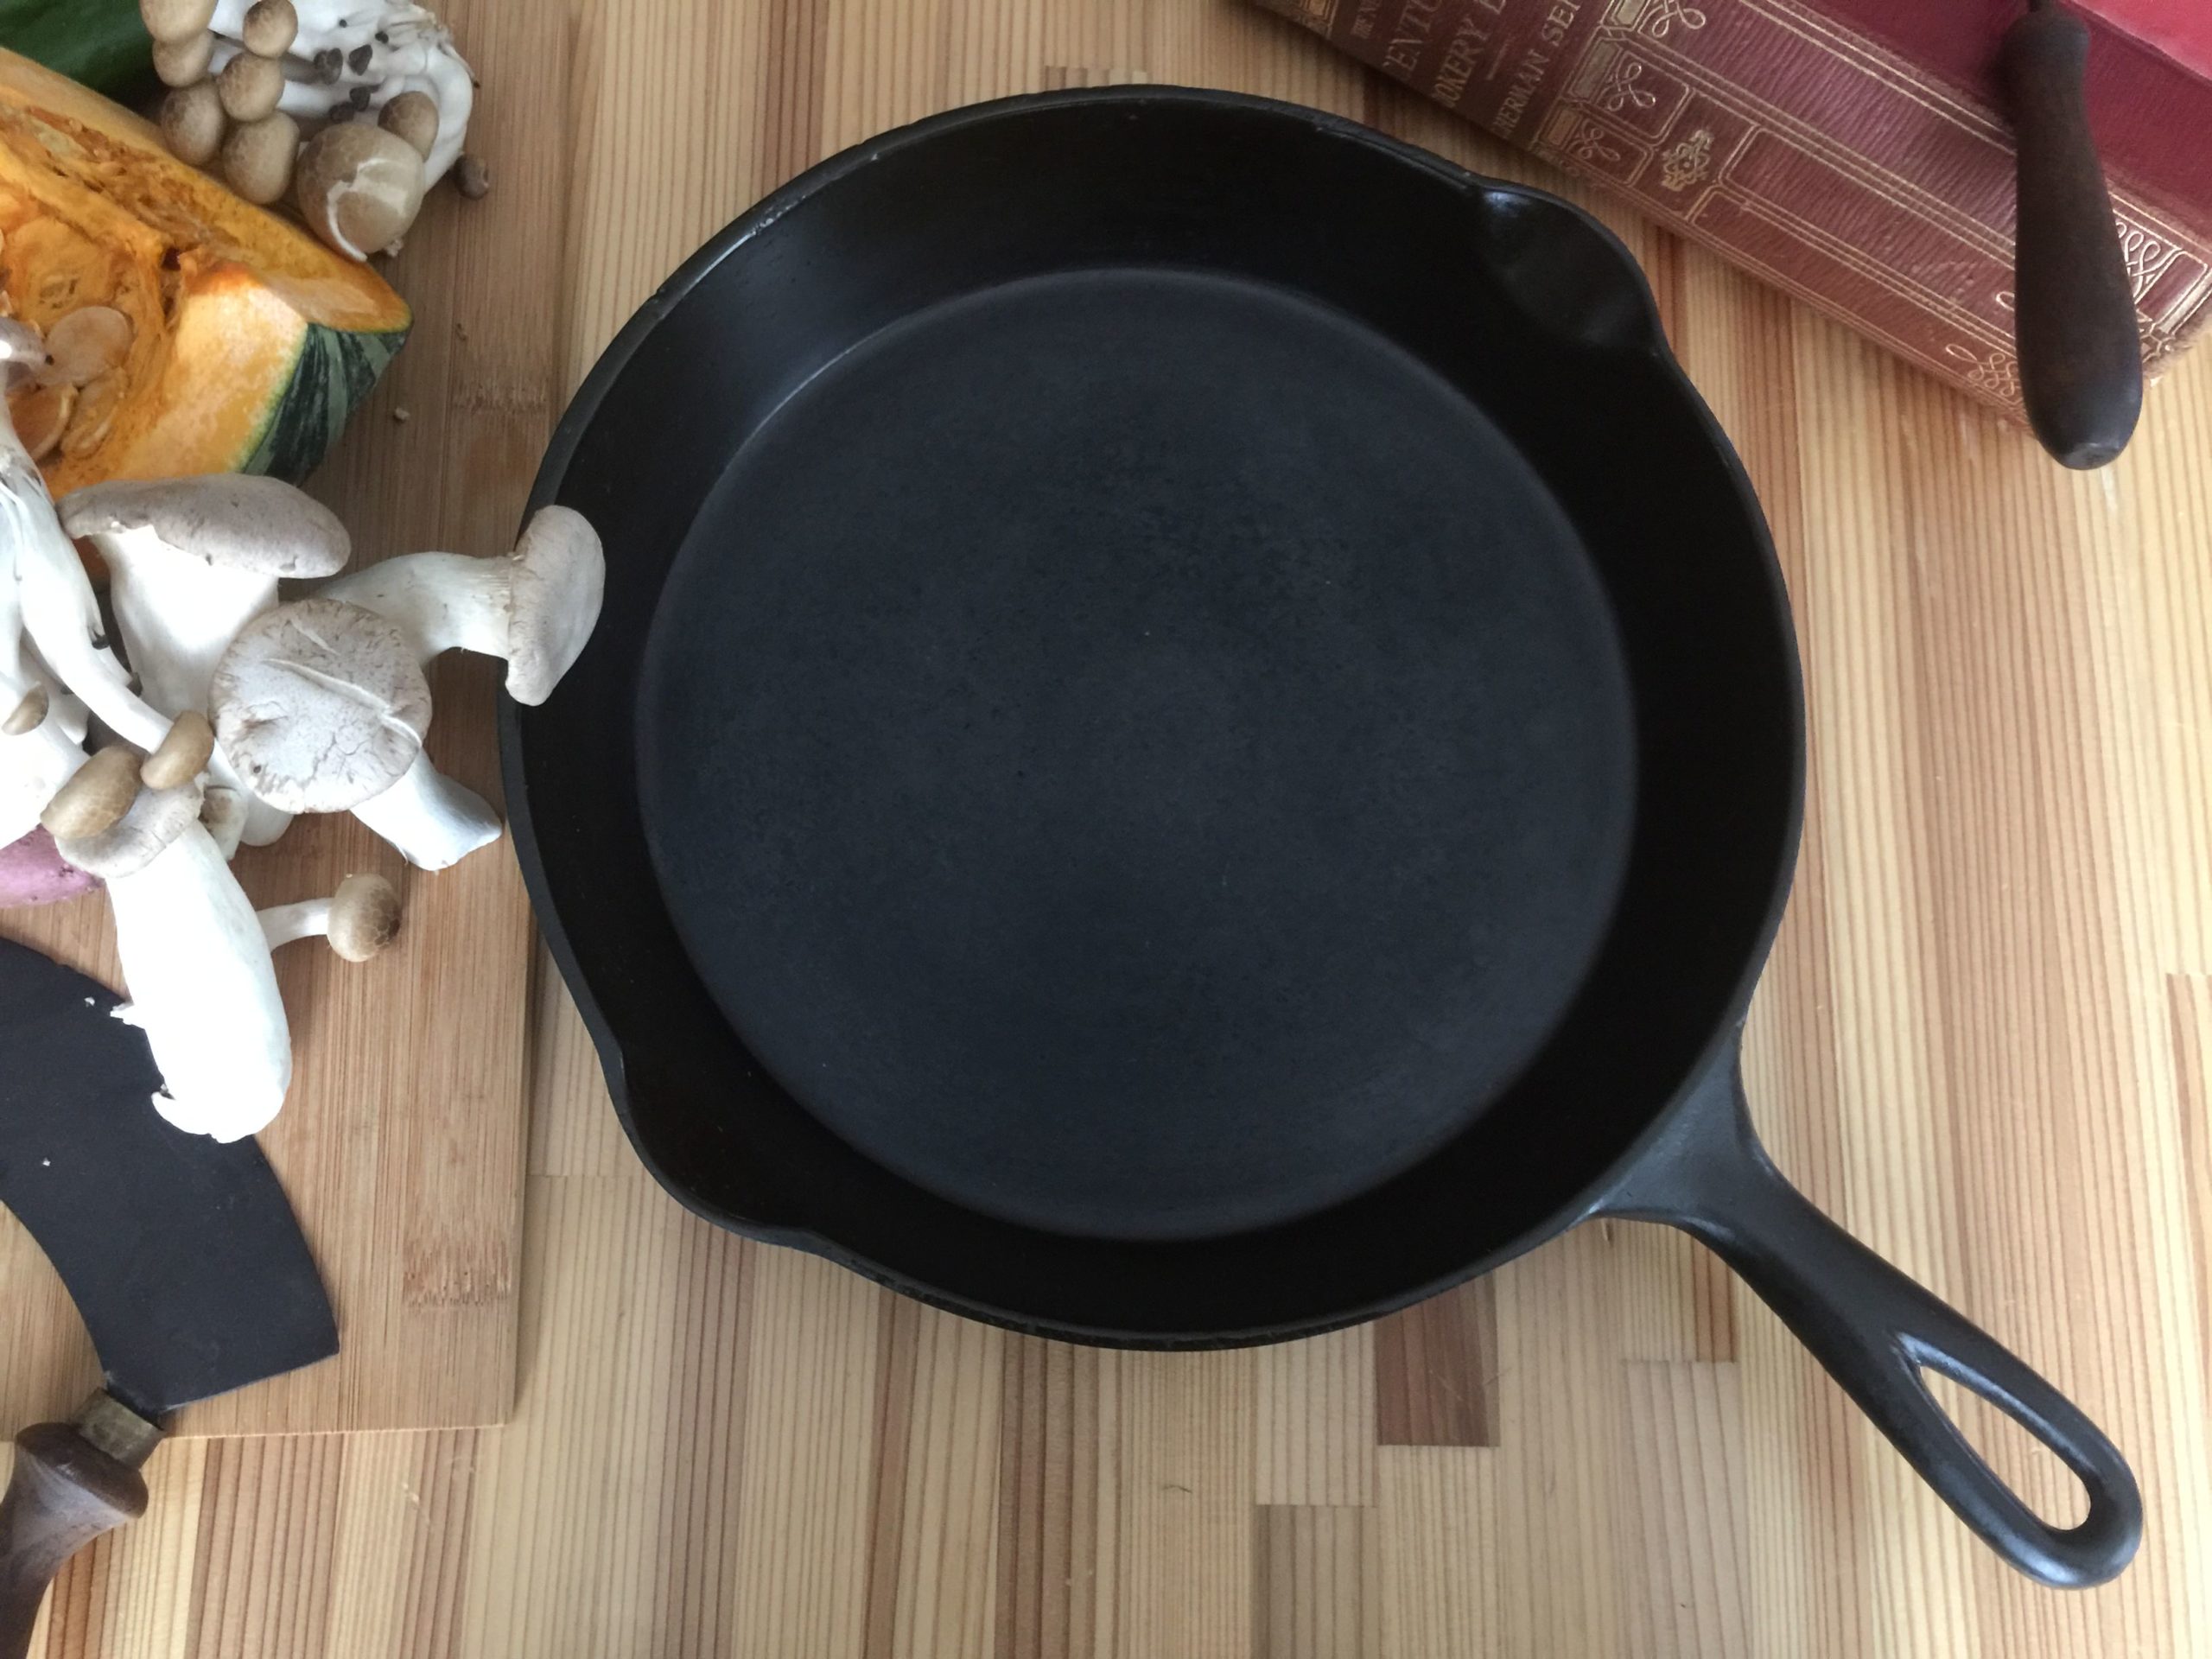 https://www.booniehicks.com/wp-content/uploads/2020/06/Favorite-cast-iron-skillet-by-Columbus-Hollow-Ware-scaled.jpg